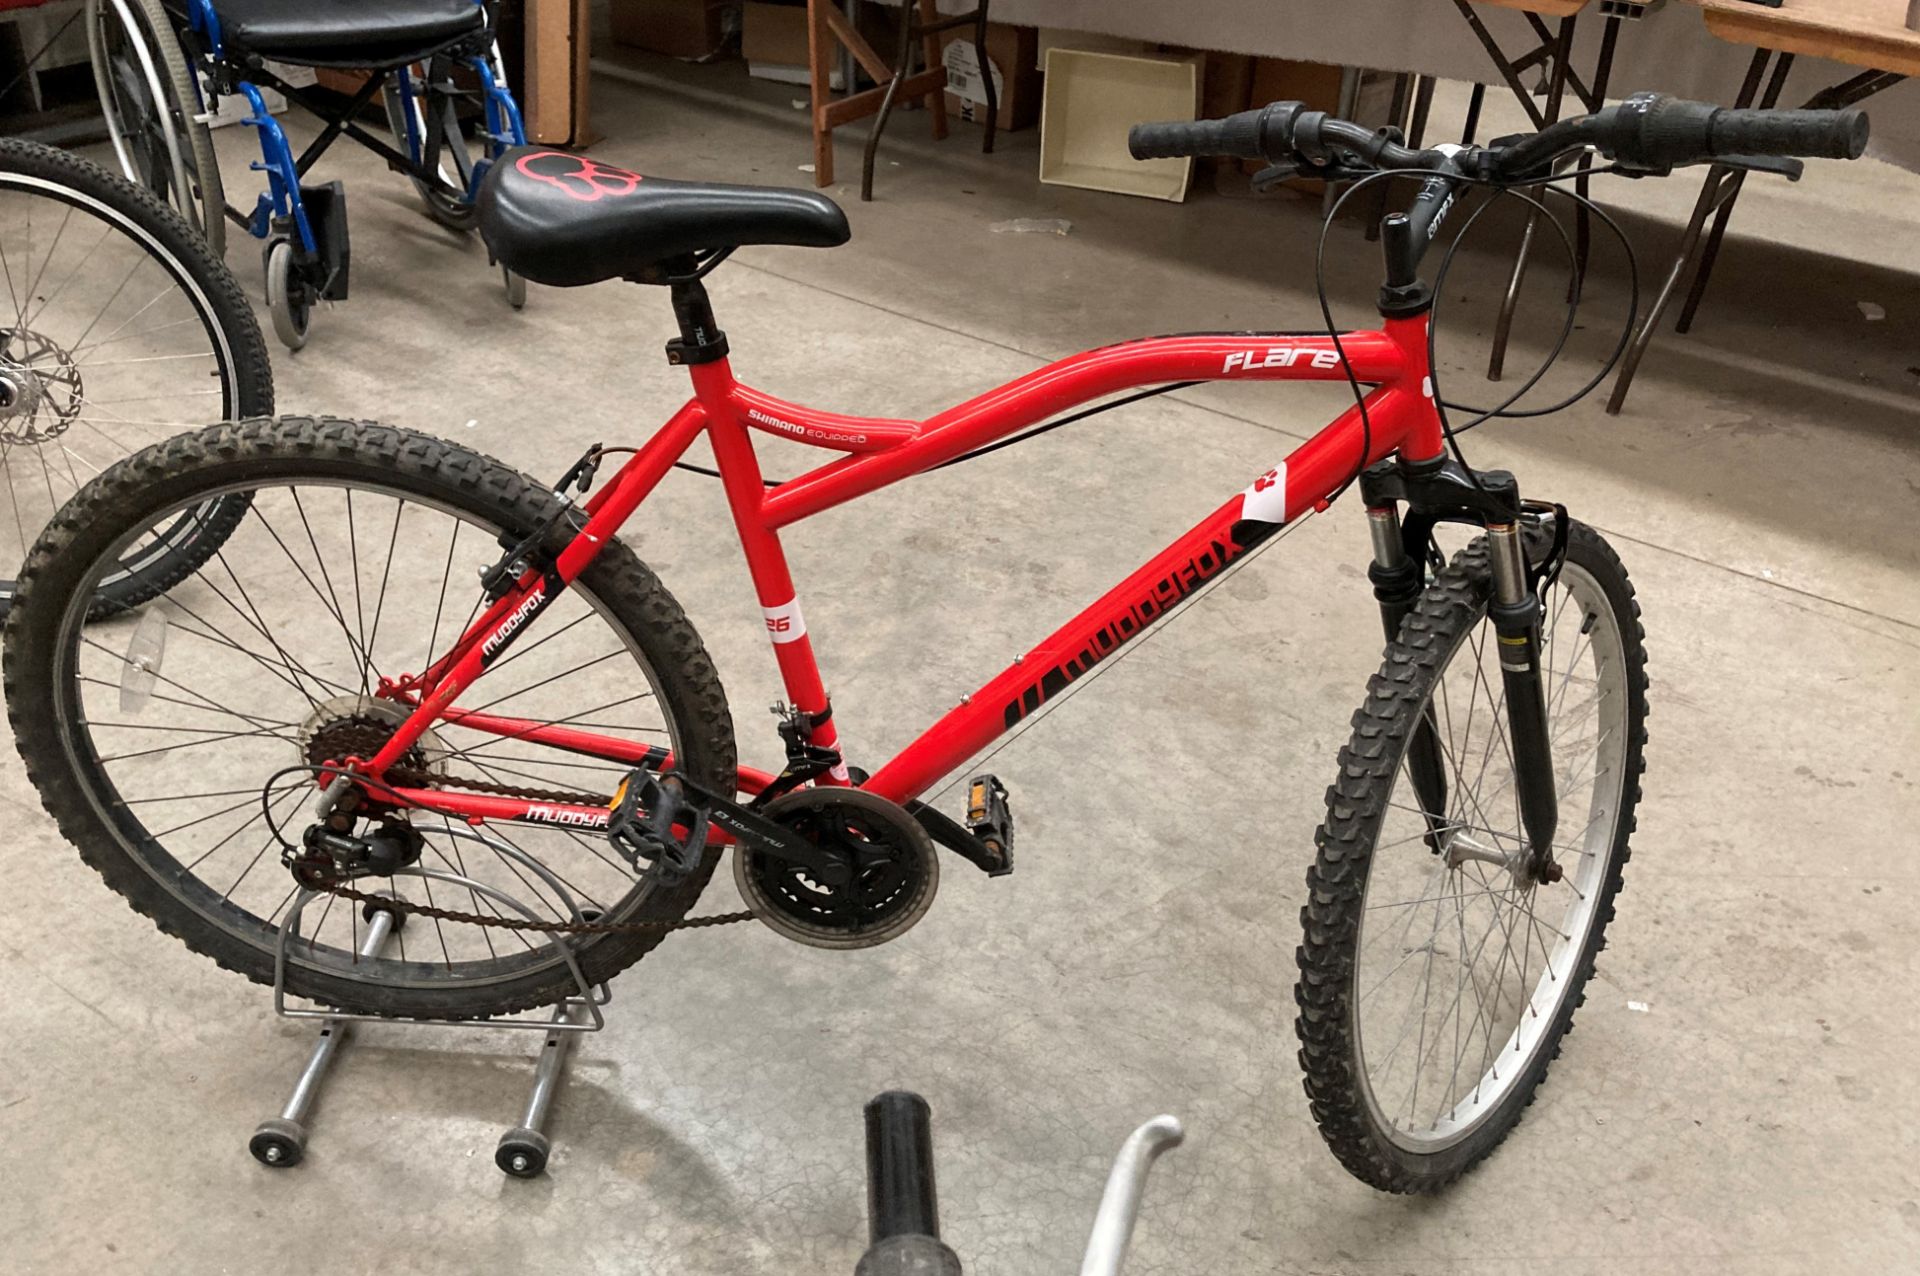 A Muddy Fox Flare 18 speed mountain bike in red - 20 " frame